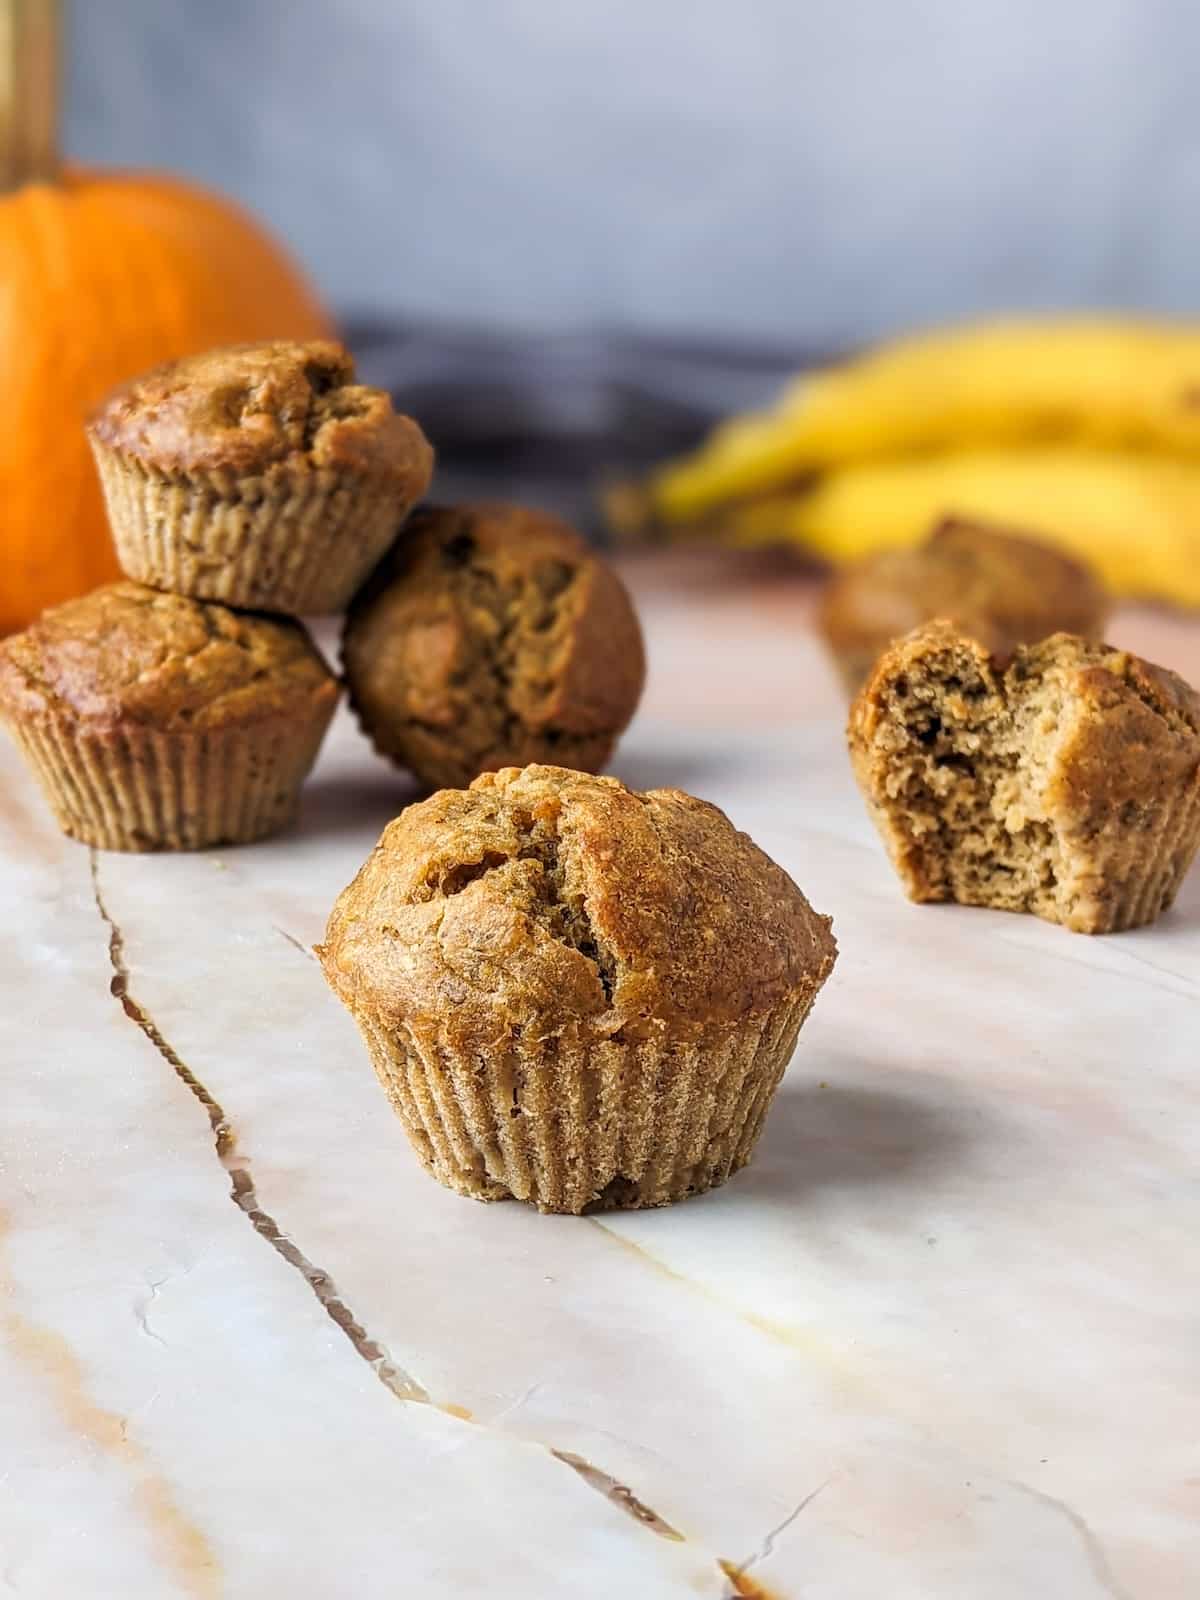 Pumpkin banana muffins on the table with a pumpkin and some bananas in the background.